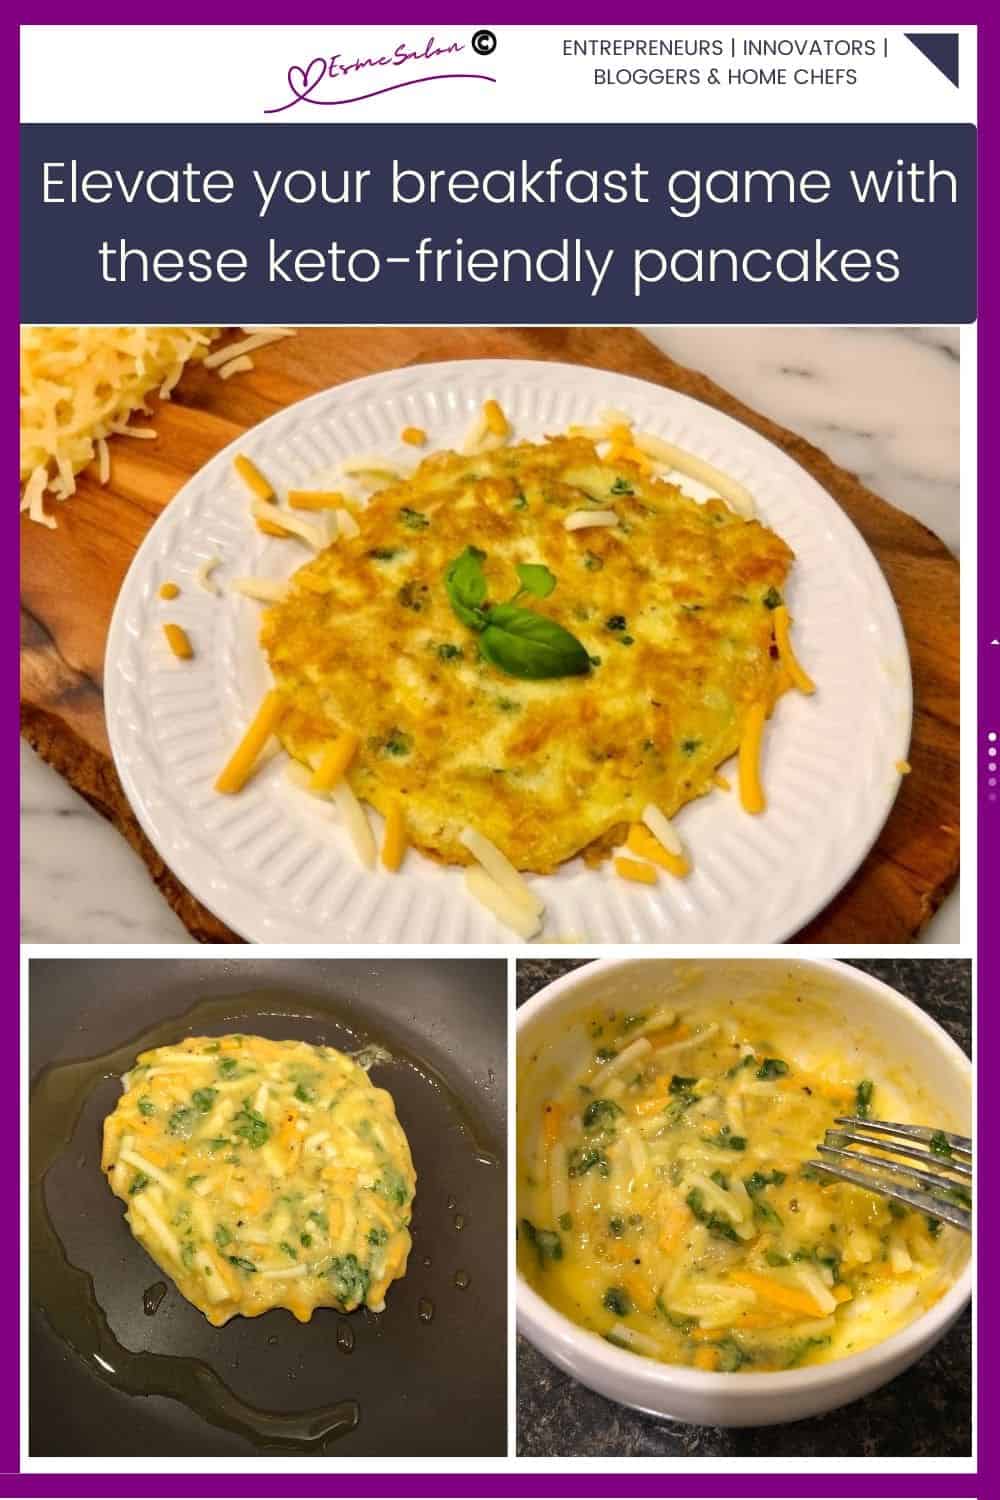 an image of Keto Cheddar Cheese Pancakes